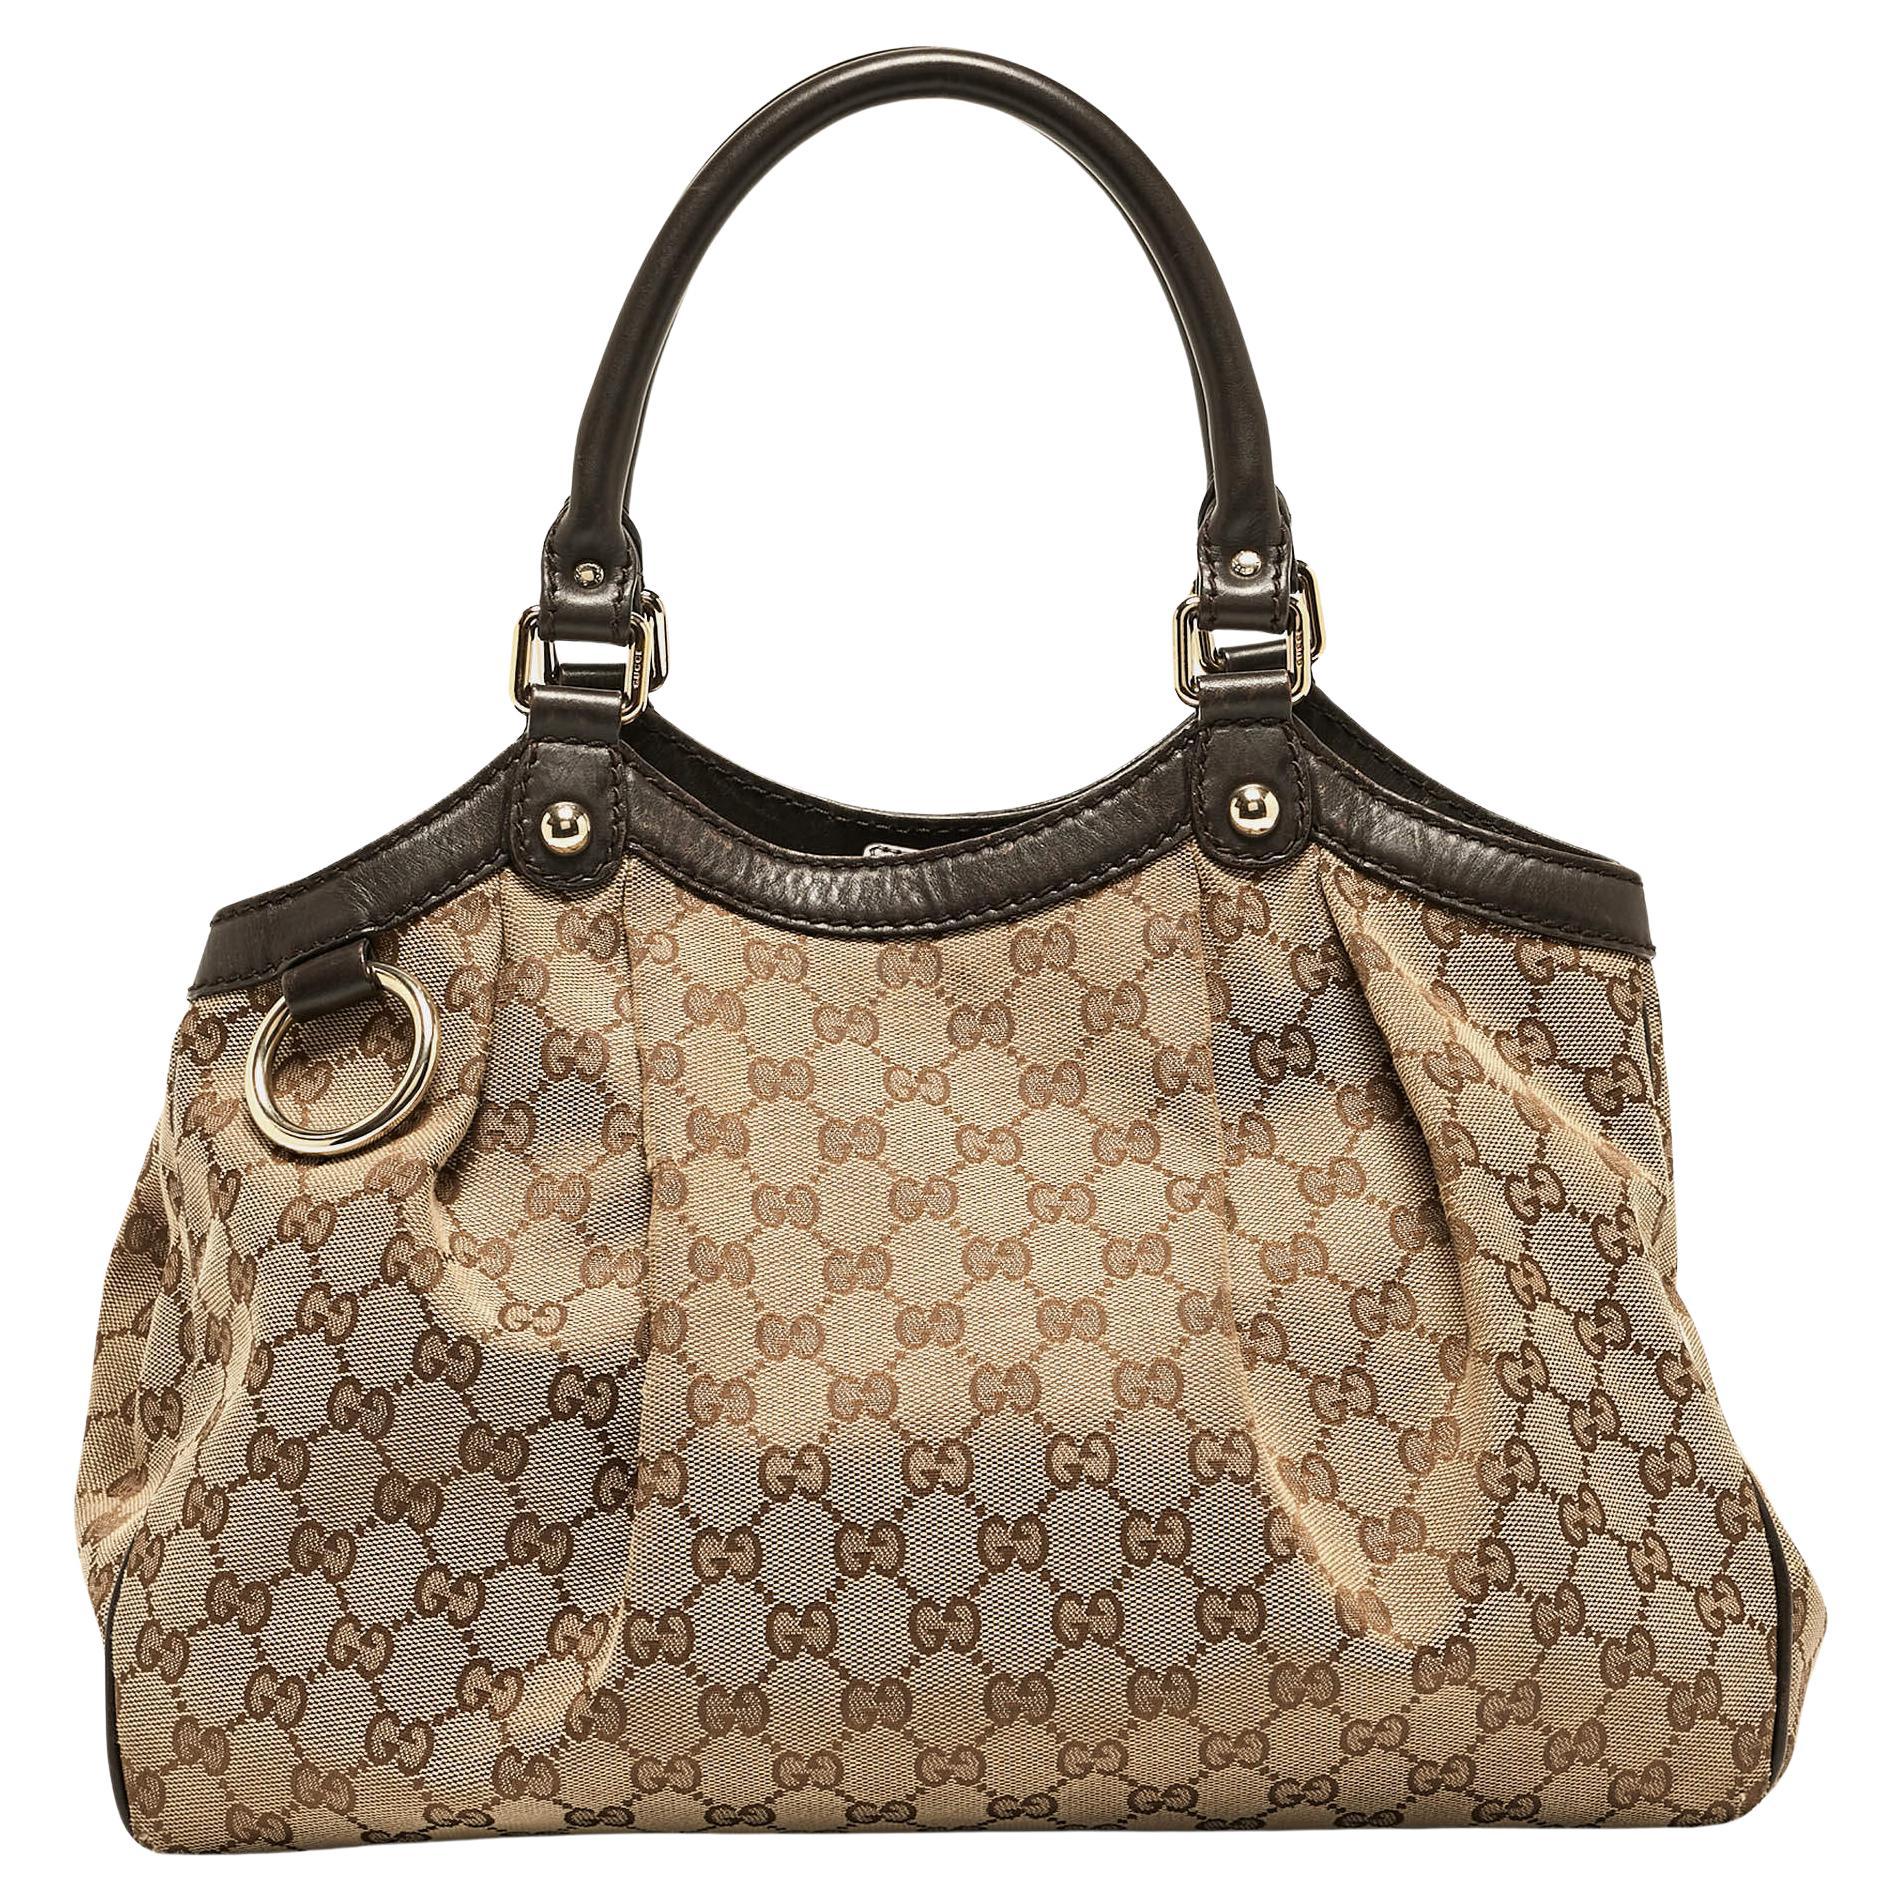 Gucci Beige/Brown GG Canvas and Leather Medium Sukey Tote